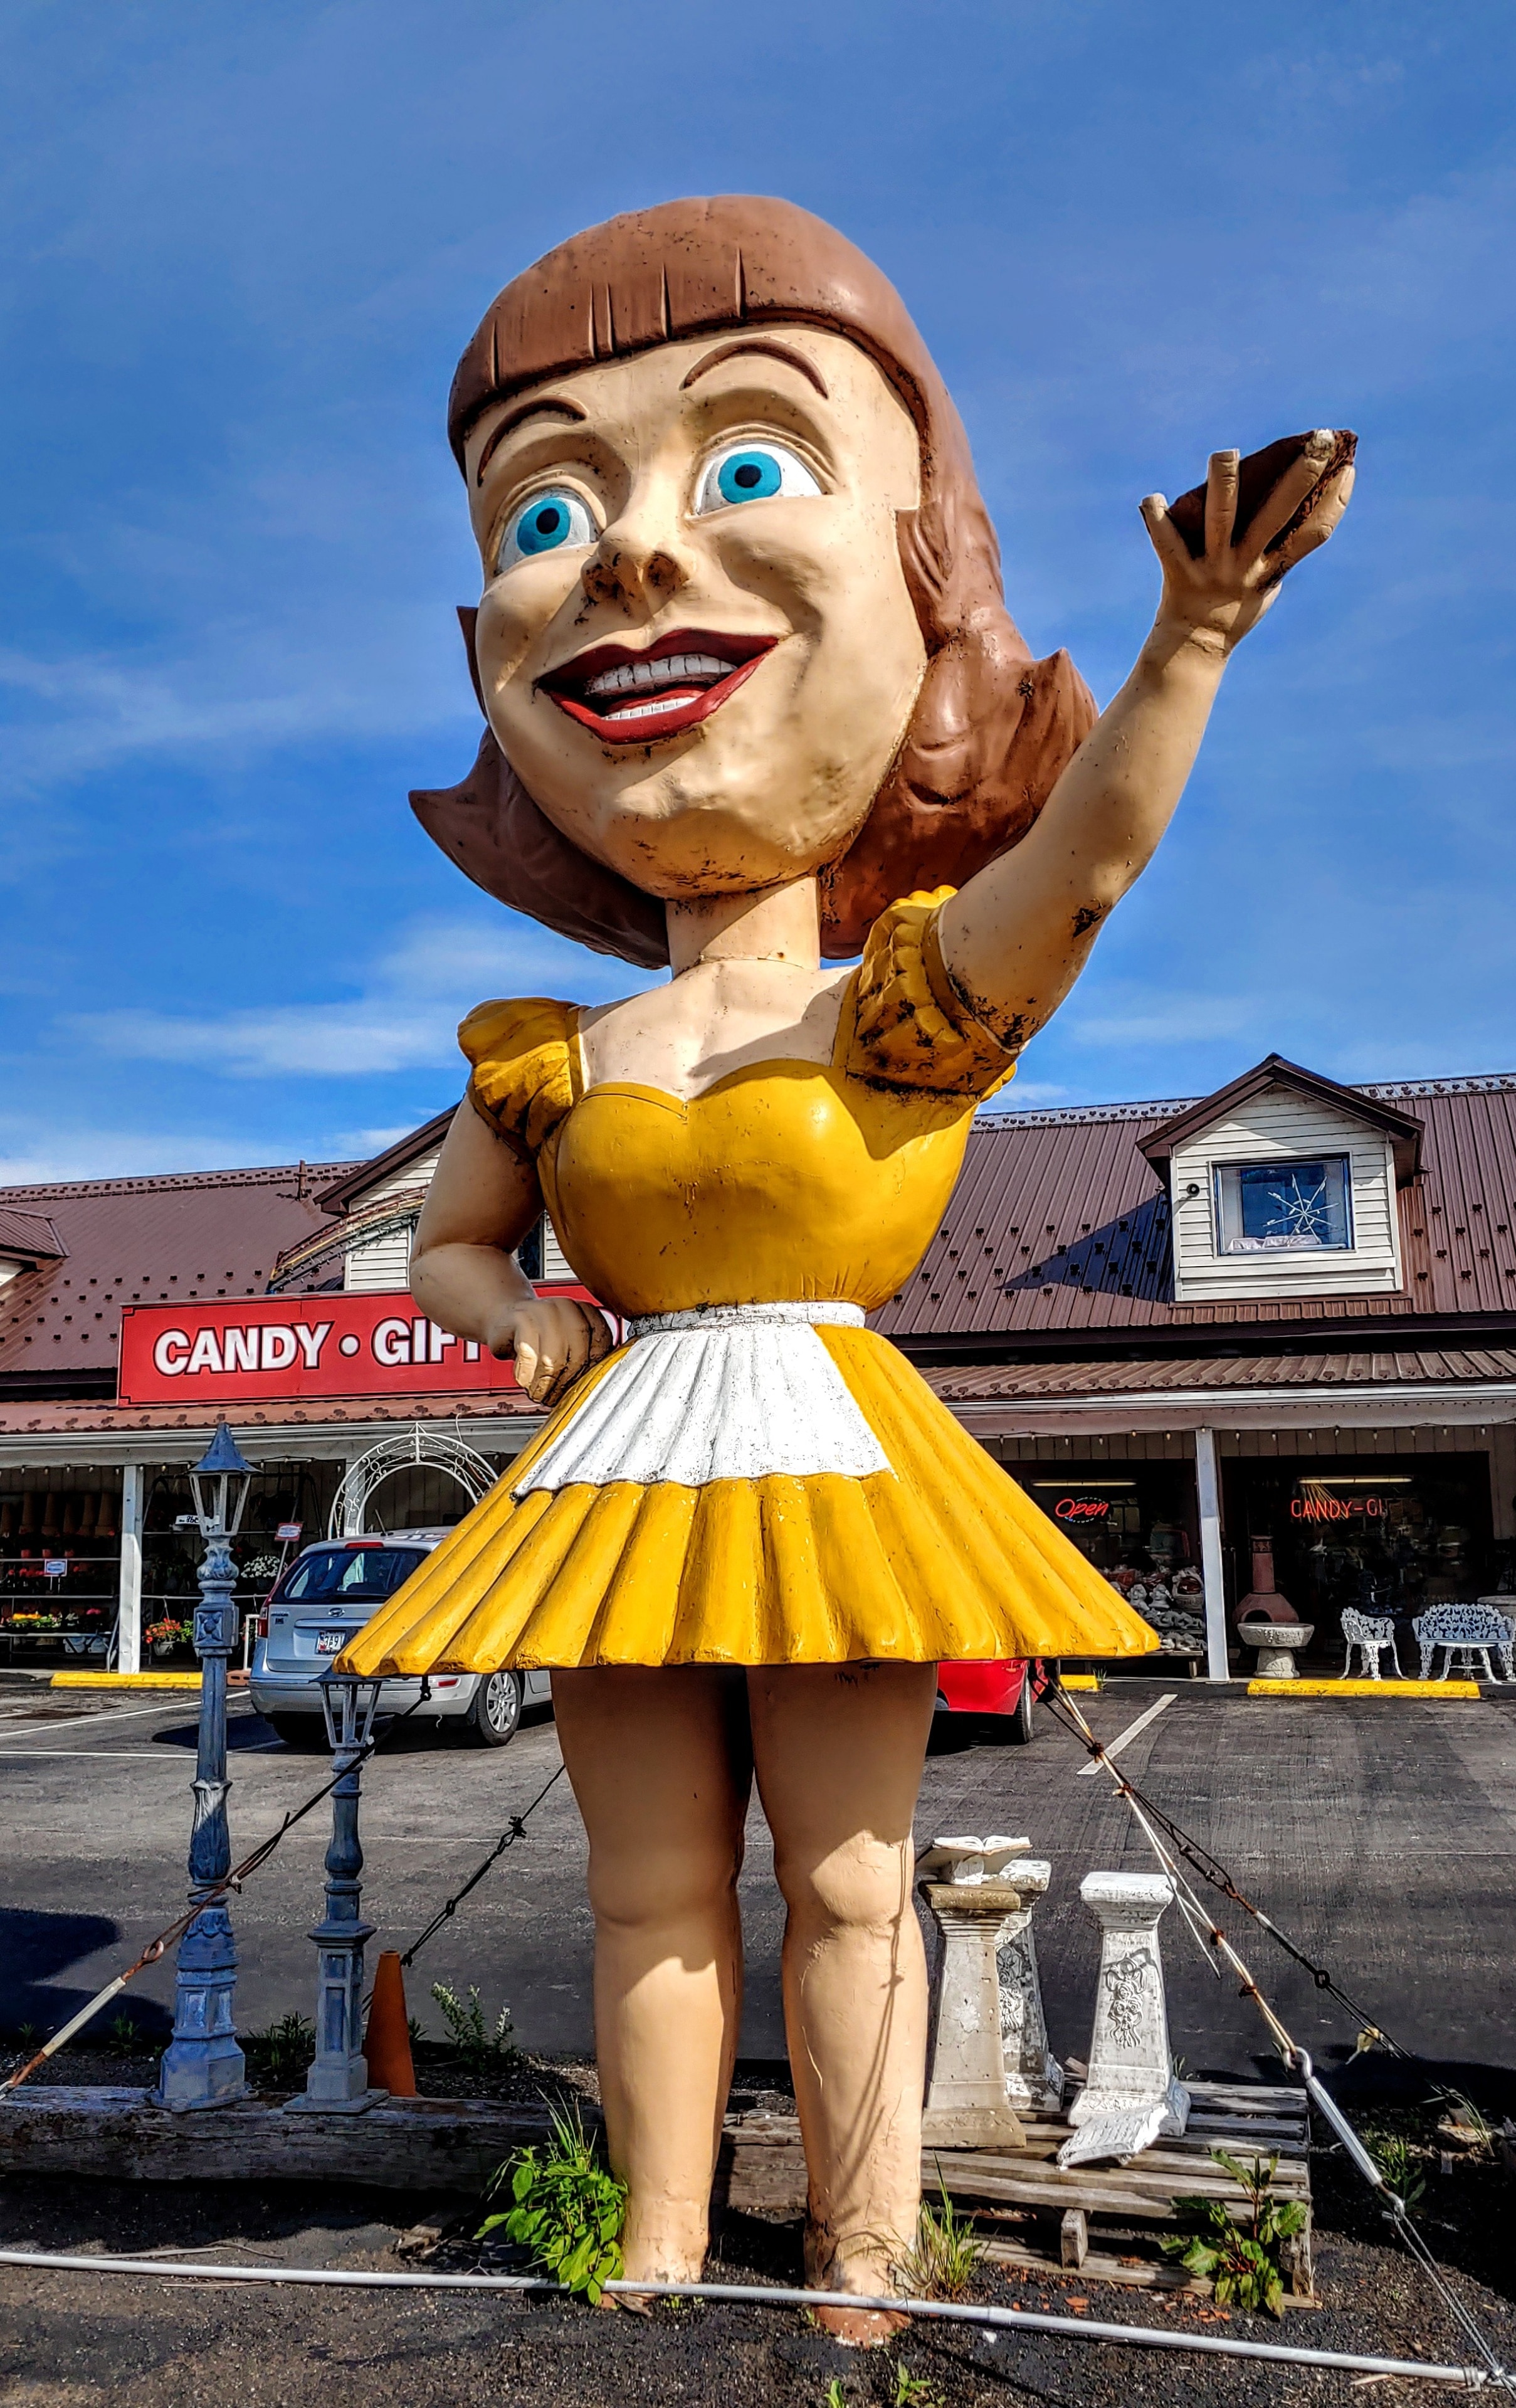 Dolly Dimples beckons you to stop at Valvo's Candies to sample their famous Sponge Candy (a chocolate covered confection with a honey comb core).

This place is another example of the fading American #culture of the roadside attraction.

Roadside attractions had their heyday with the rise of the automobile. As Americans increasingly traveled by car, many businesses had one shot to attract the attention of potential customers zipping by at higher and higher speeds.

Thus, the creation of larger than life, brightly colored, oddball sculptures along America's burgeoning highways and byways.